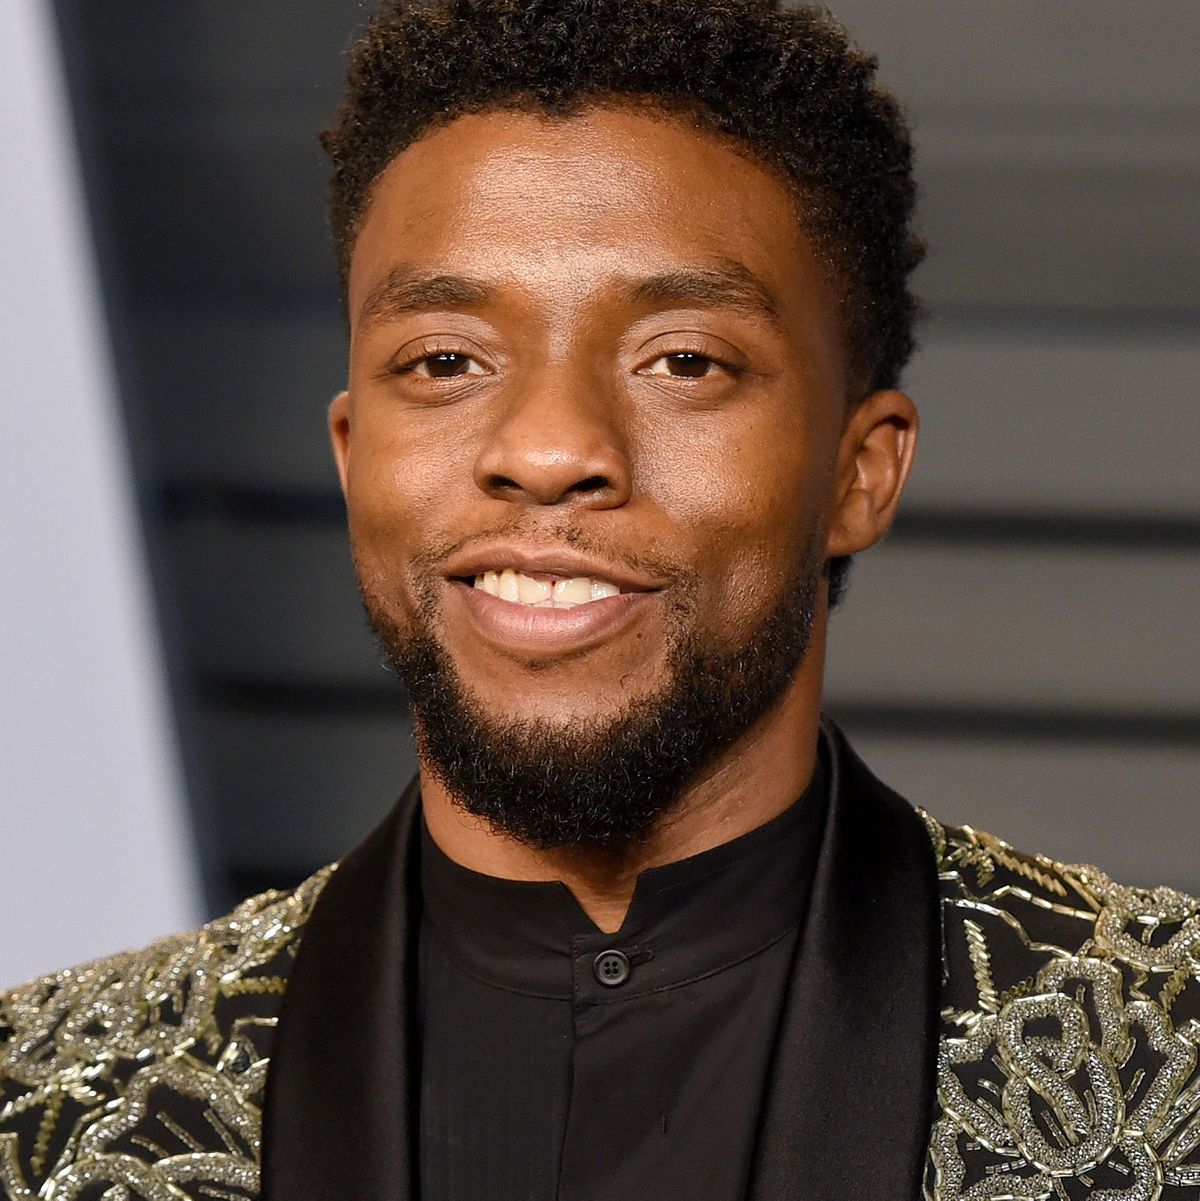 The Defiant Career of Chadwick Boseman, a Hollywood King